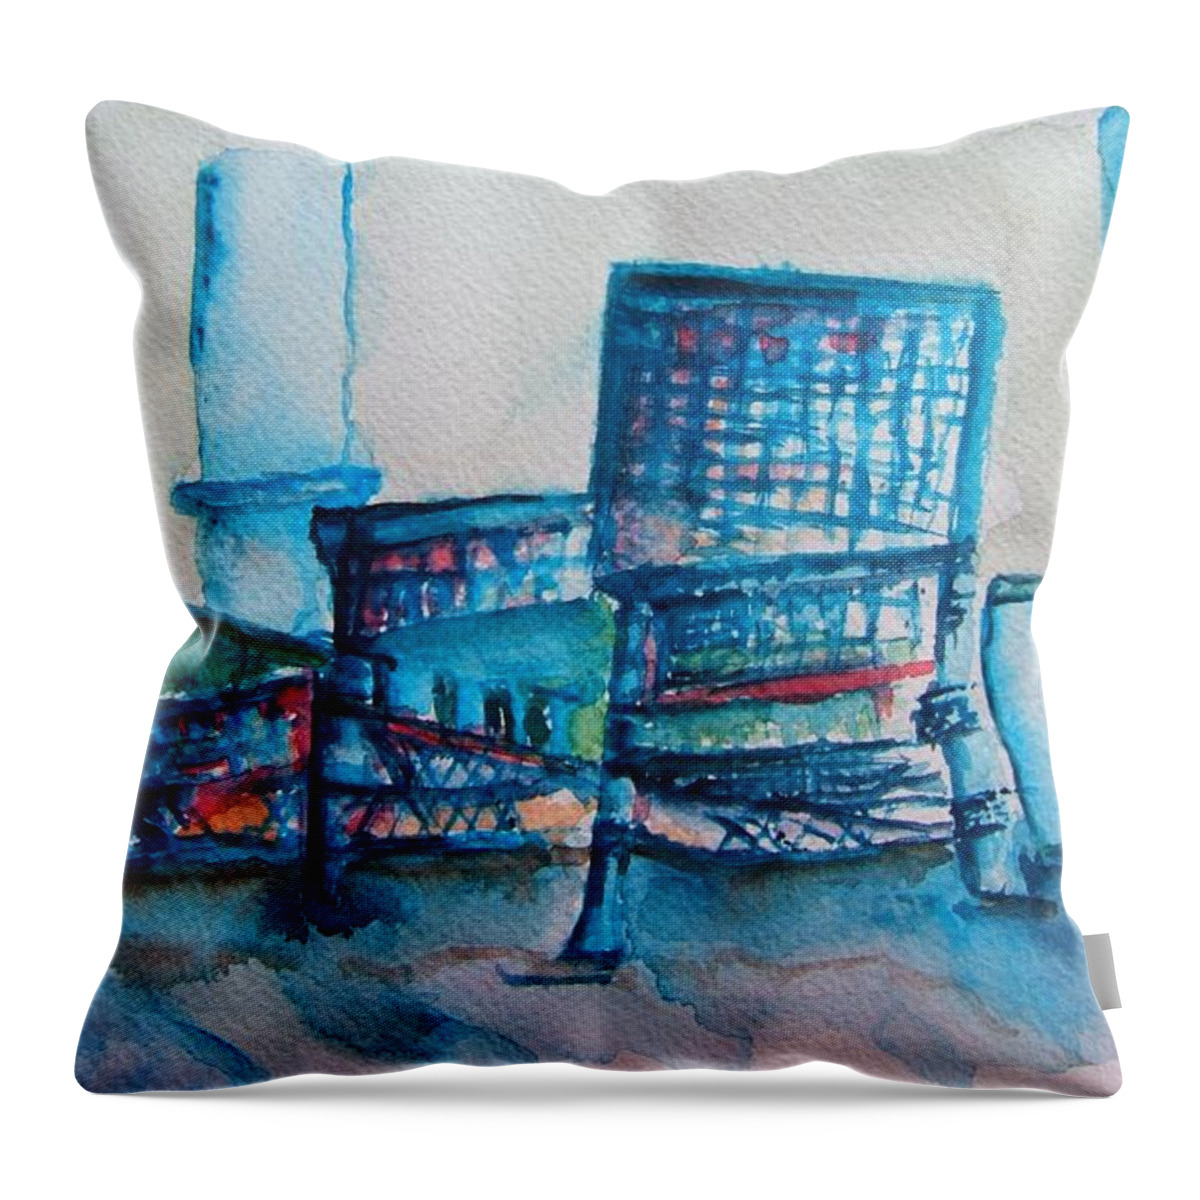 Wicker Throw Pillow featuring the painting Turquoise Check In by Elaine Duras